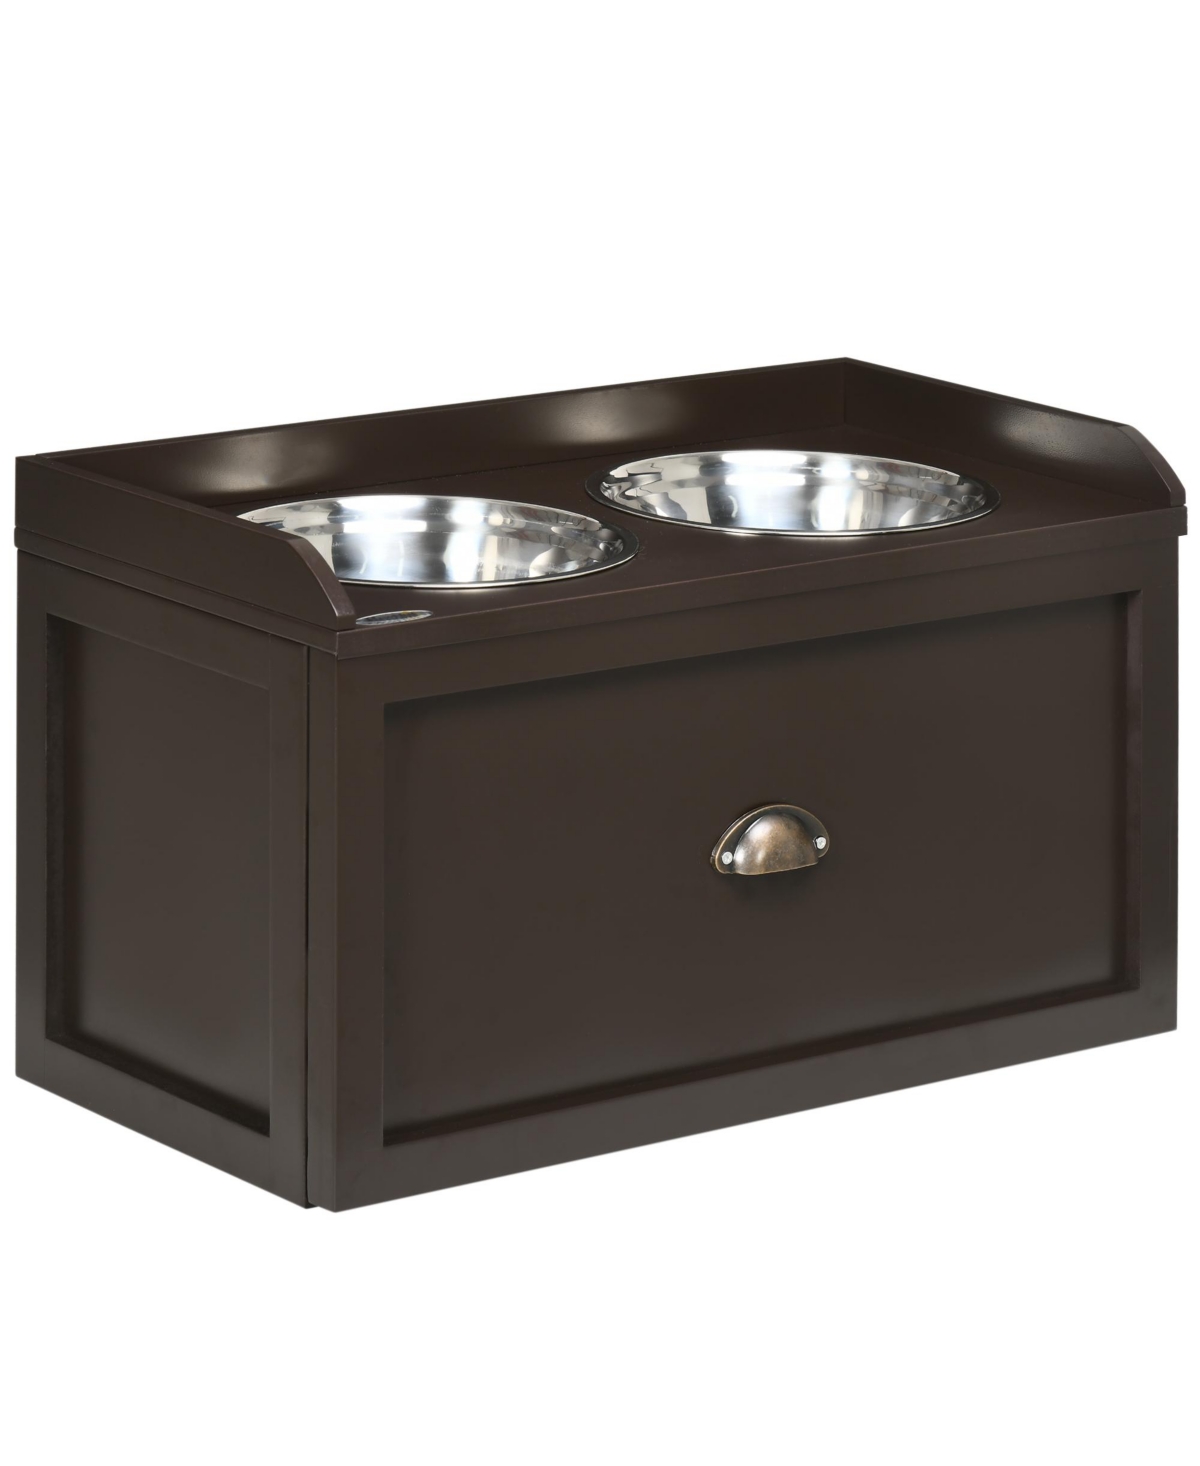 Large Elevated Dog Bowls with Storage, Raised Dog Bowl Stand, Brown - Brown